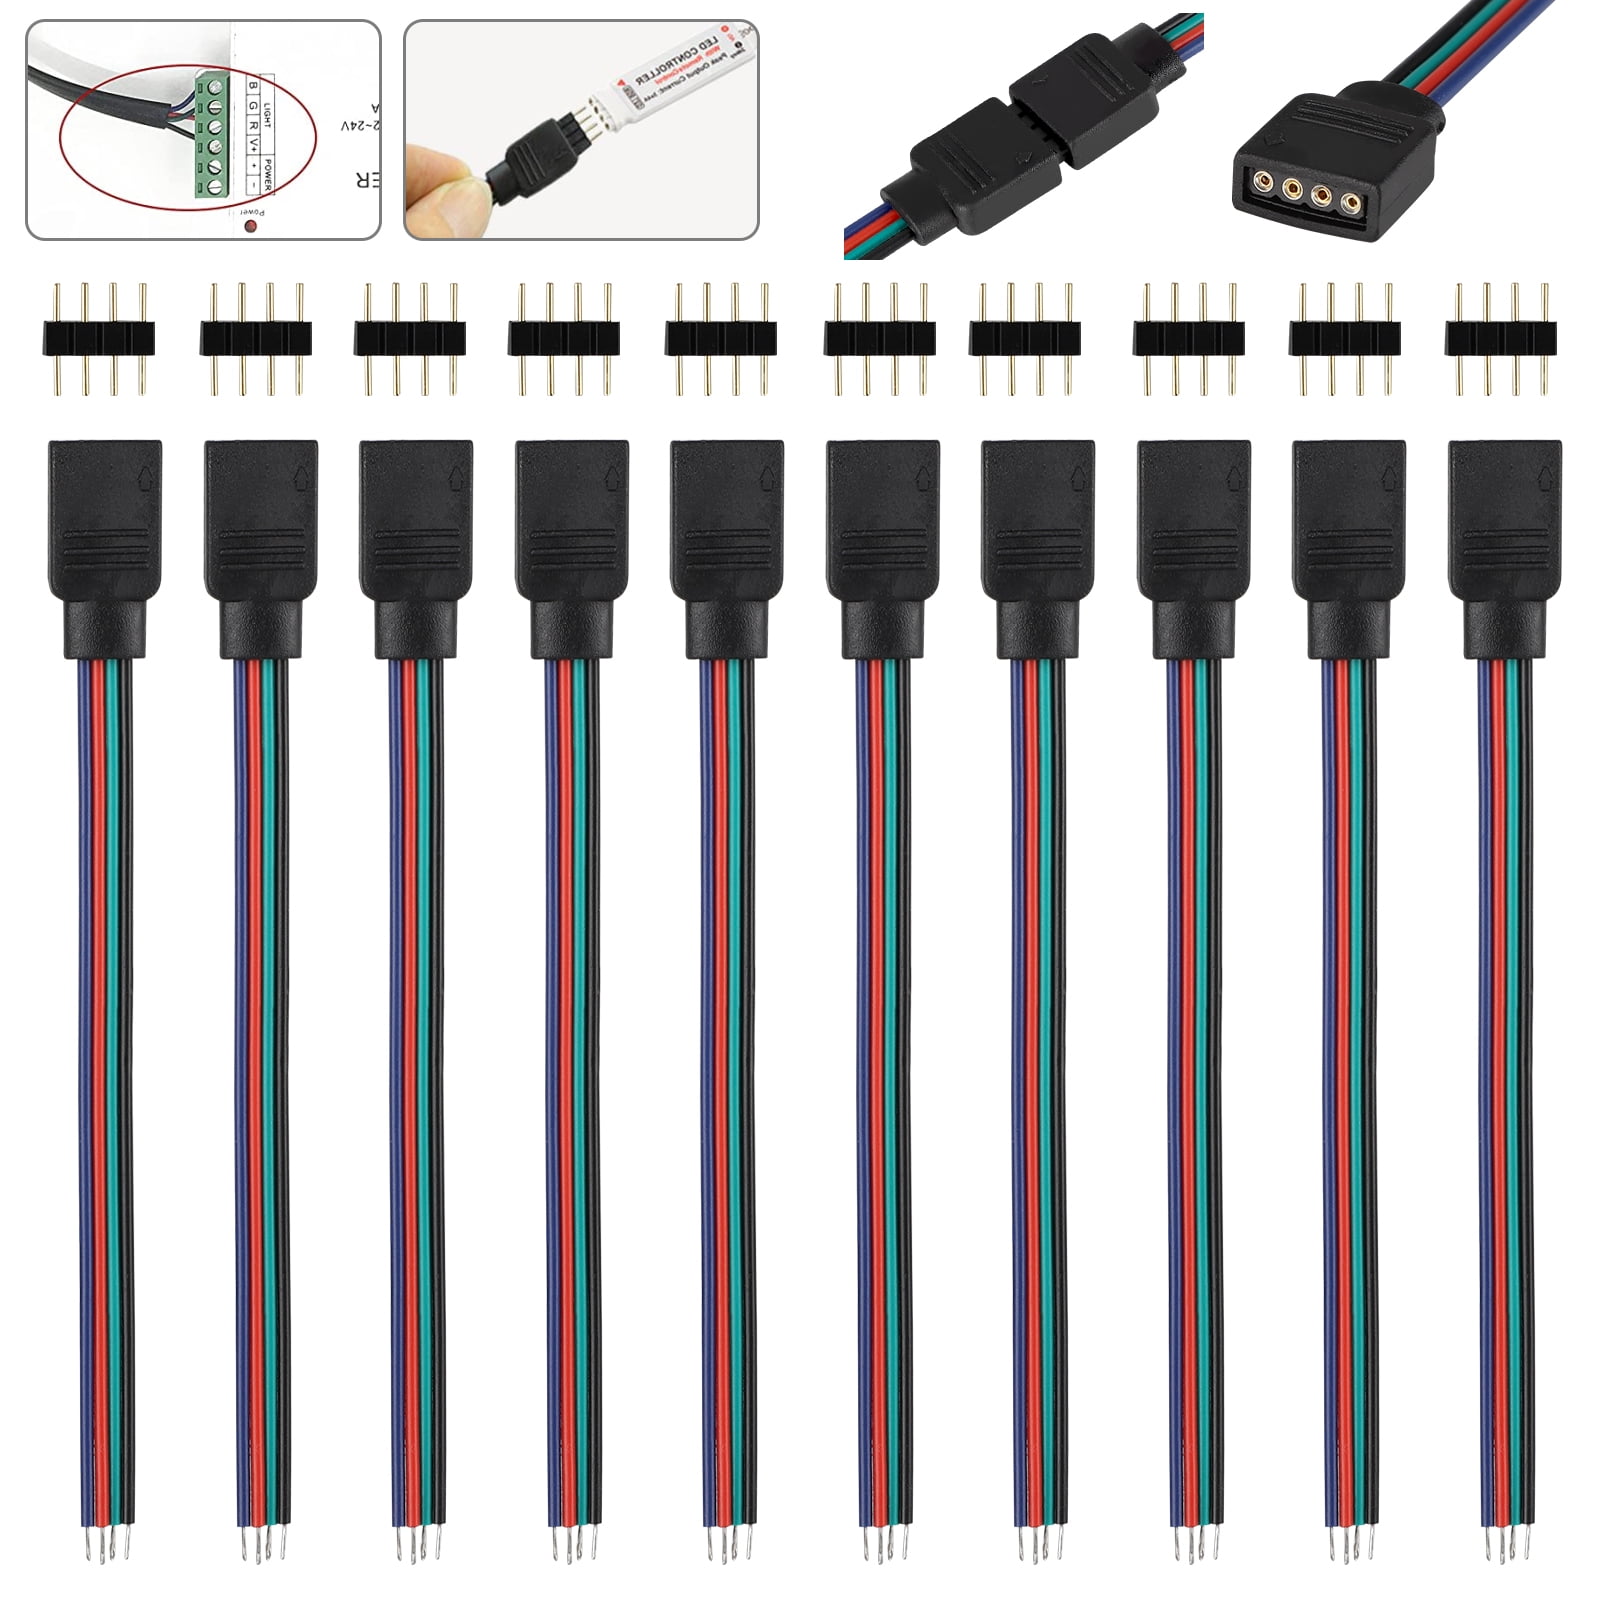 10x 4 Pin Female Male Connector Cable For RGB 3528 5050 LED Strip Light 